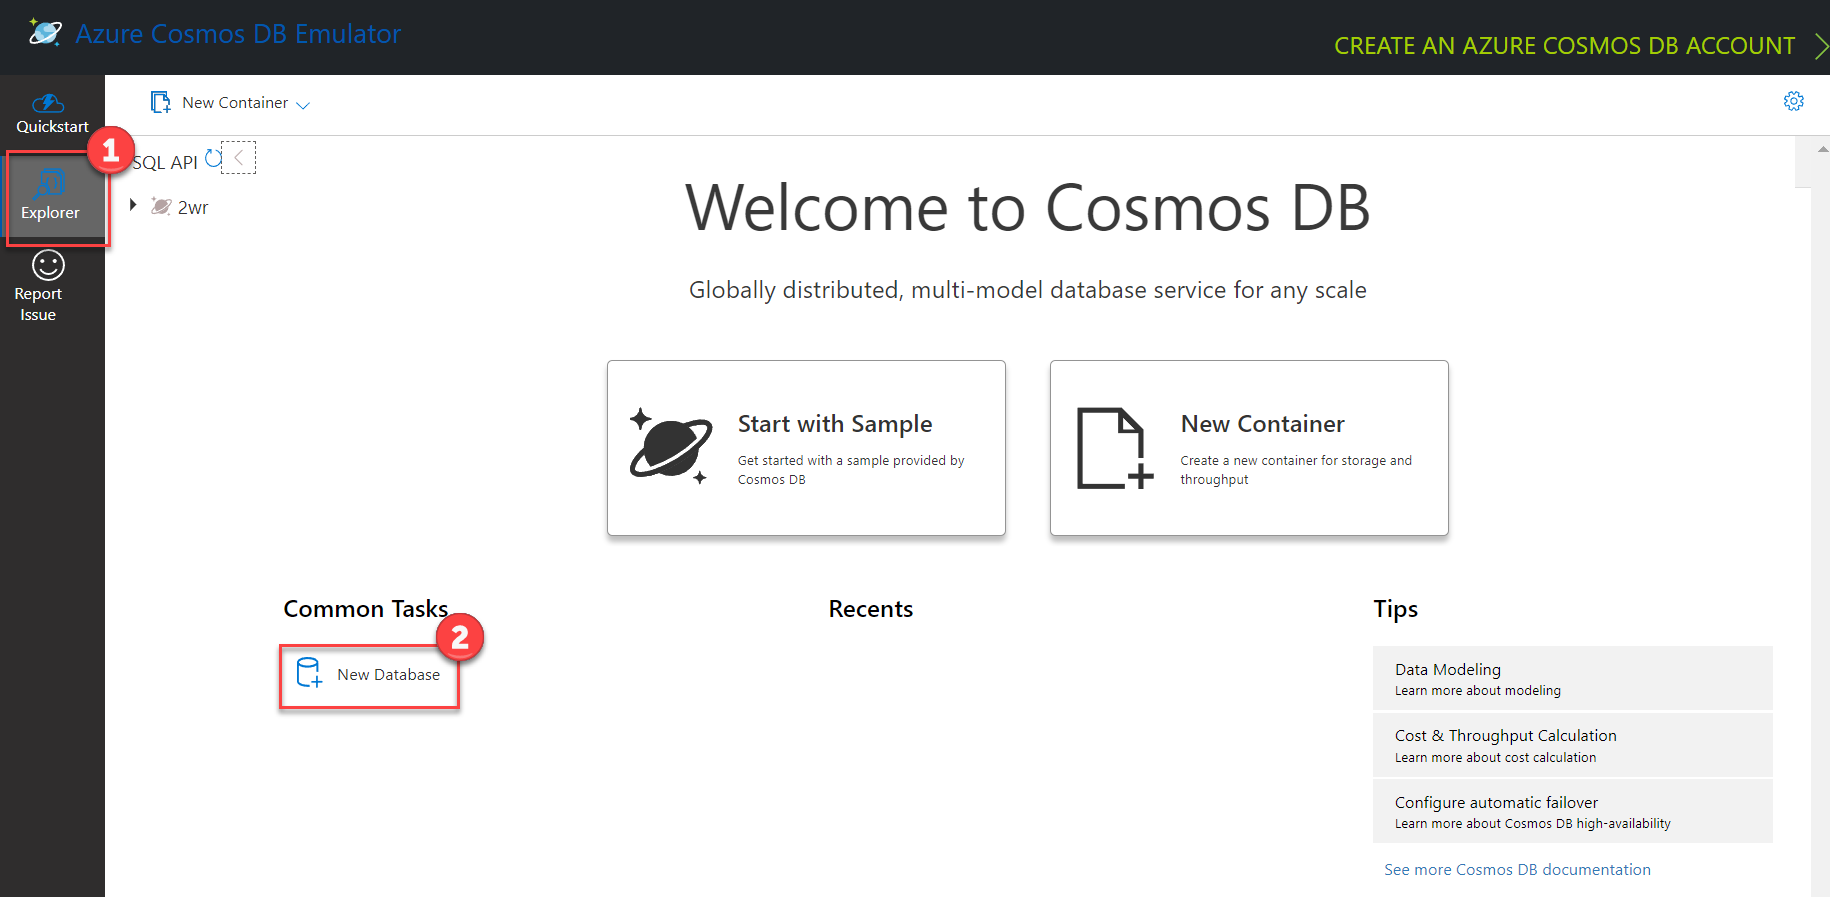 The Azure Cosmos DB emulator screen displays with Explorer selected from the left menu and the New Database link highlighted beneath the Common Tasks heading.